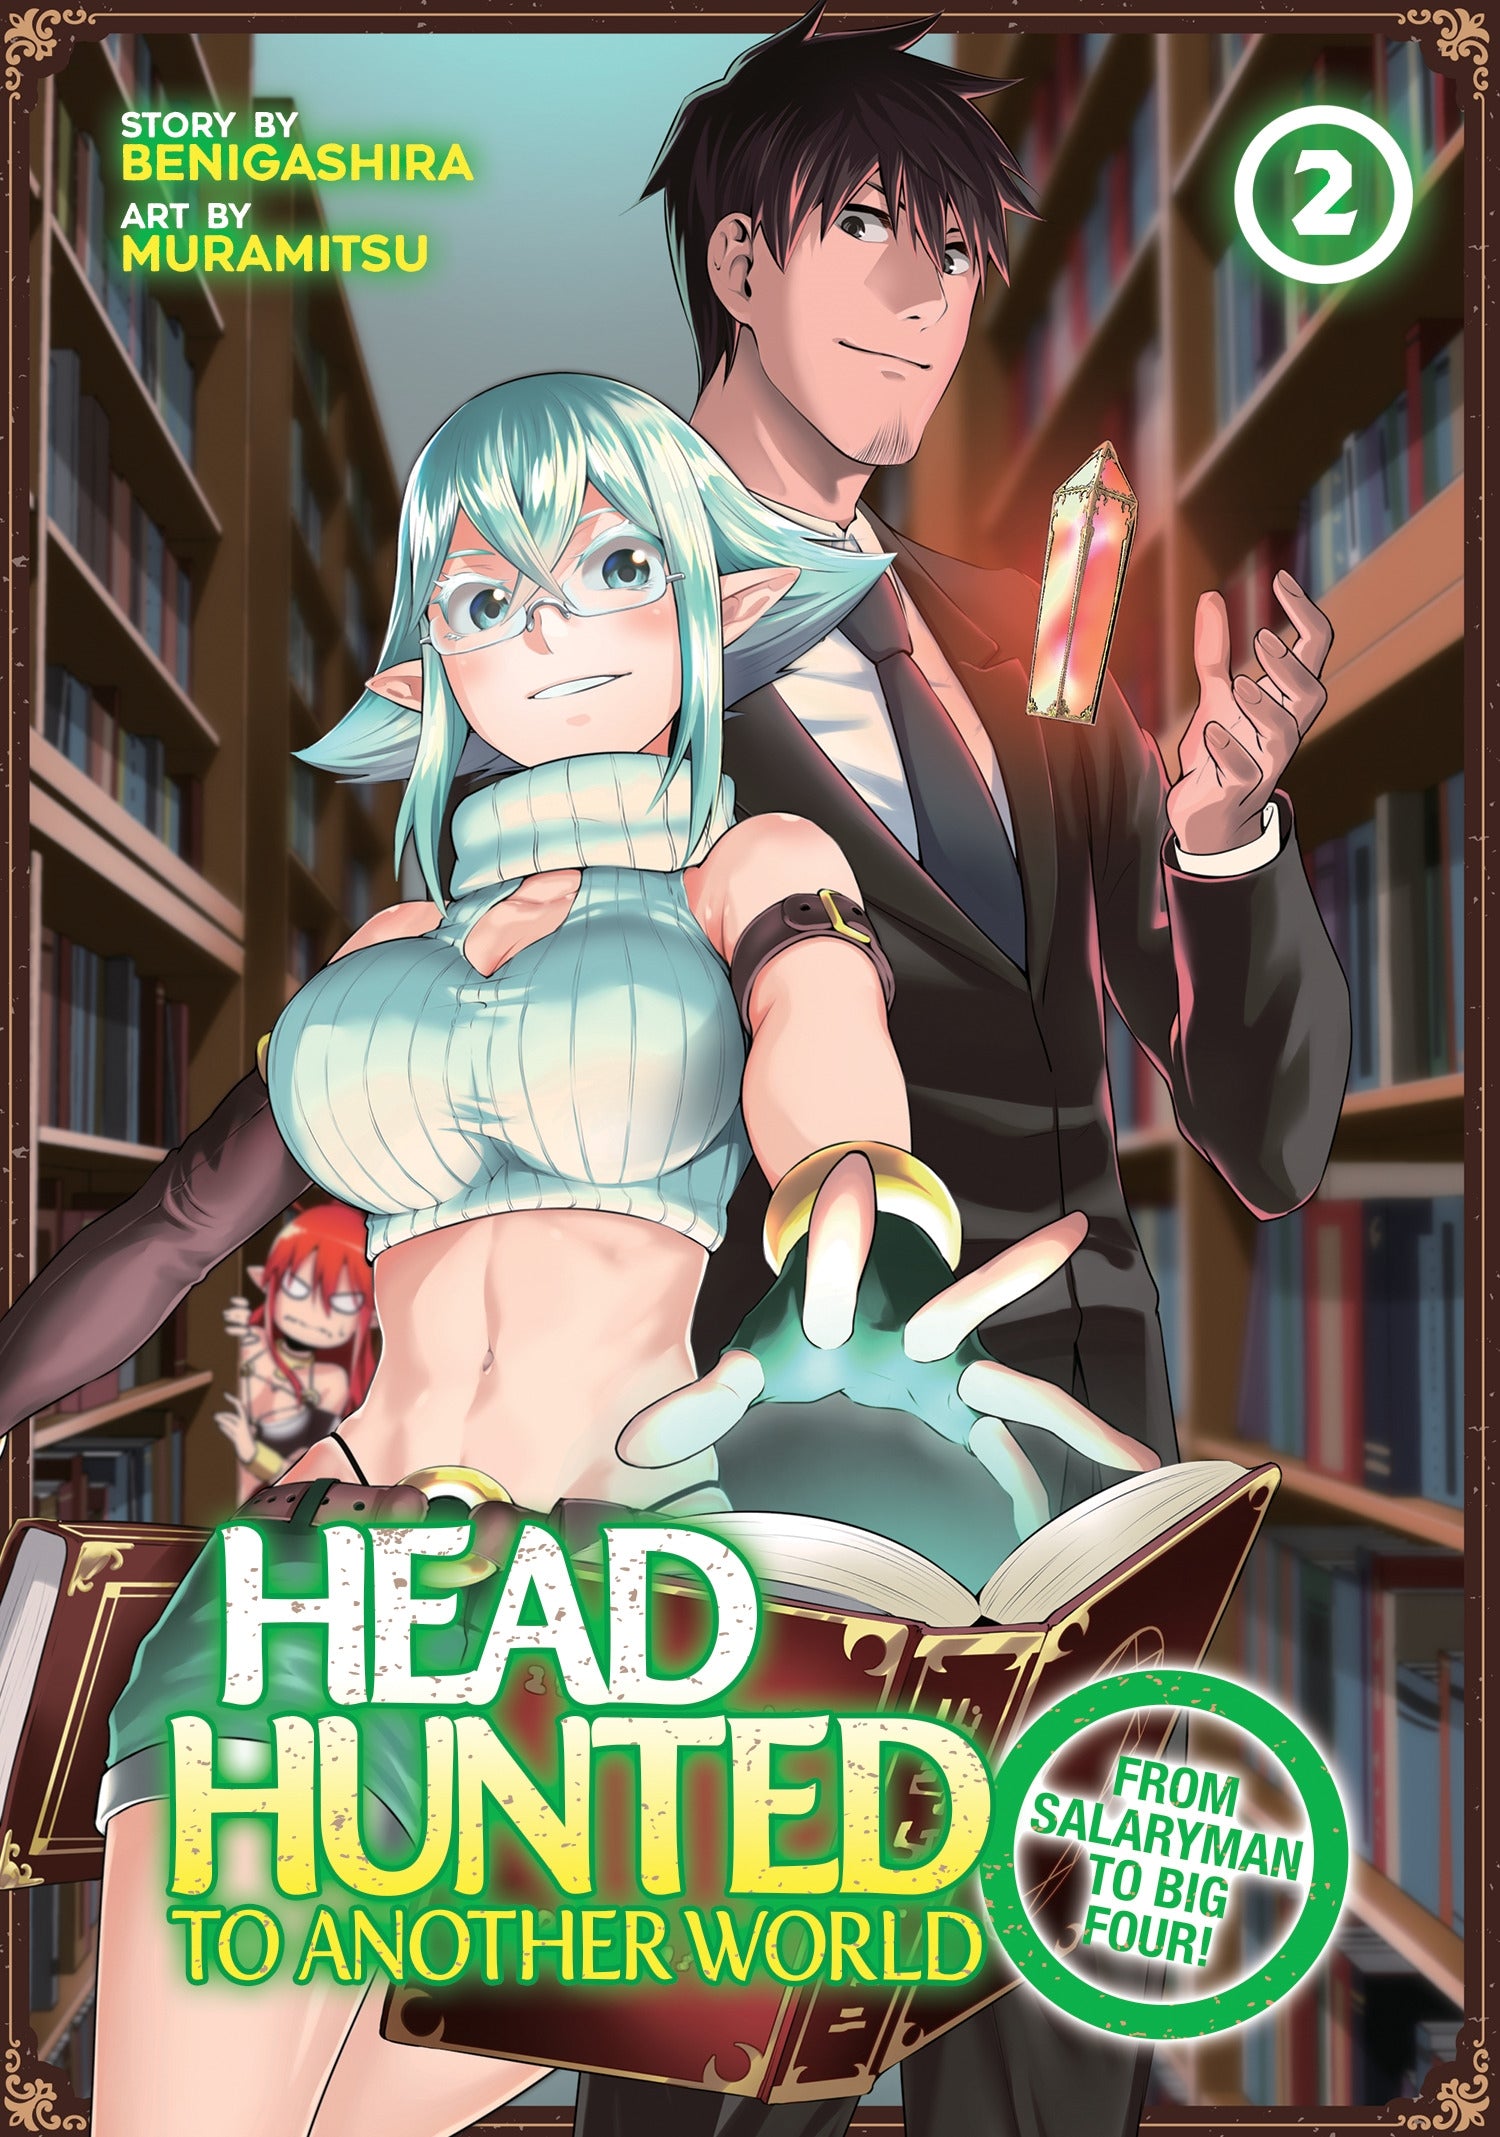 Headhunted to Another World : From Salaryman to Big Four! Vol. 2 - Manga Warehouse